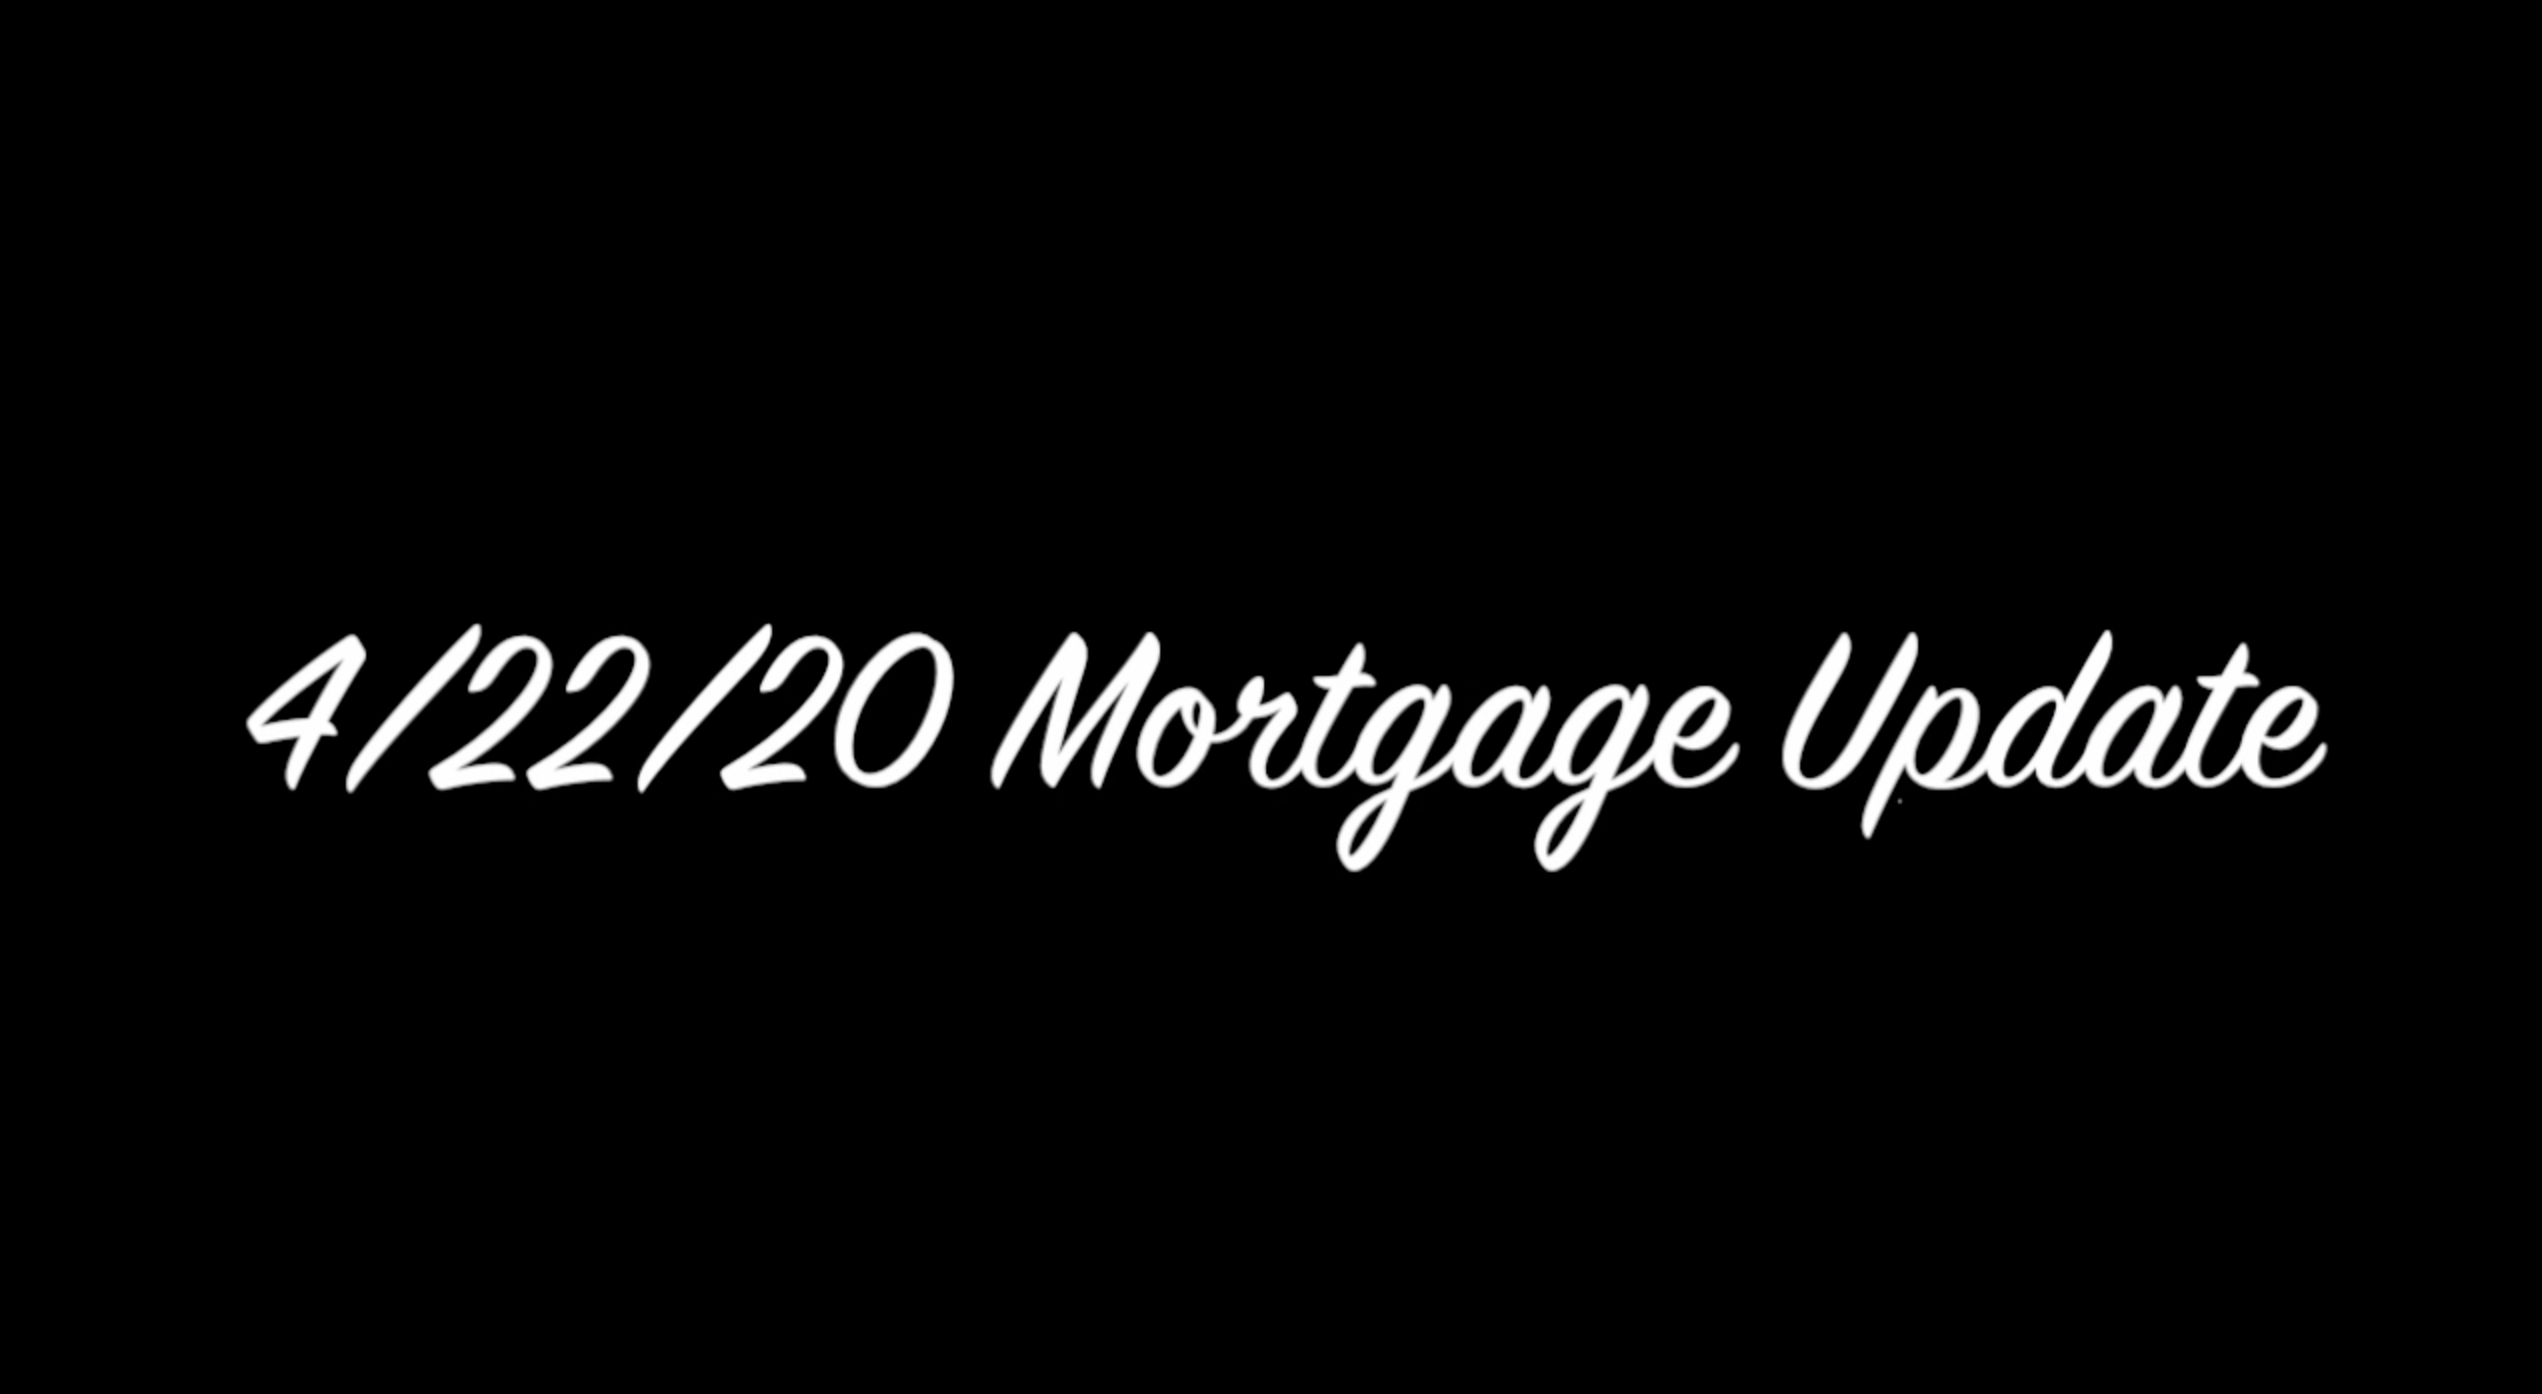 4/22/20 Mortgage Update w/ my guest Cathy Haddad of Atlantic Home Loans